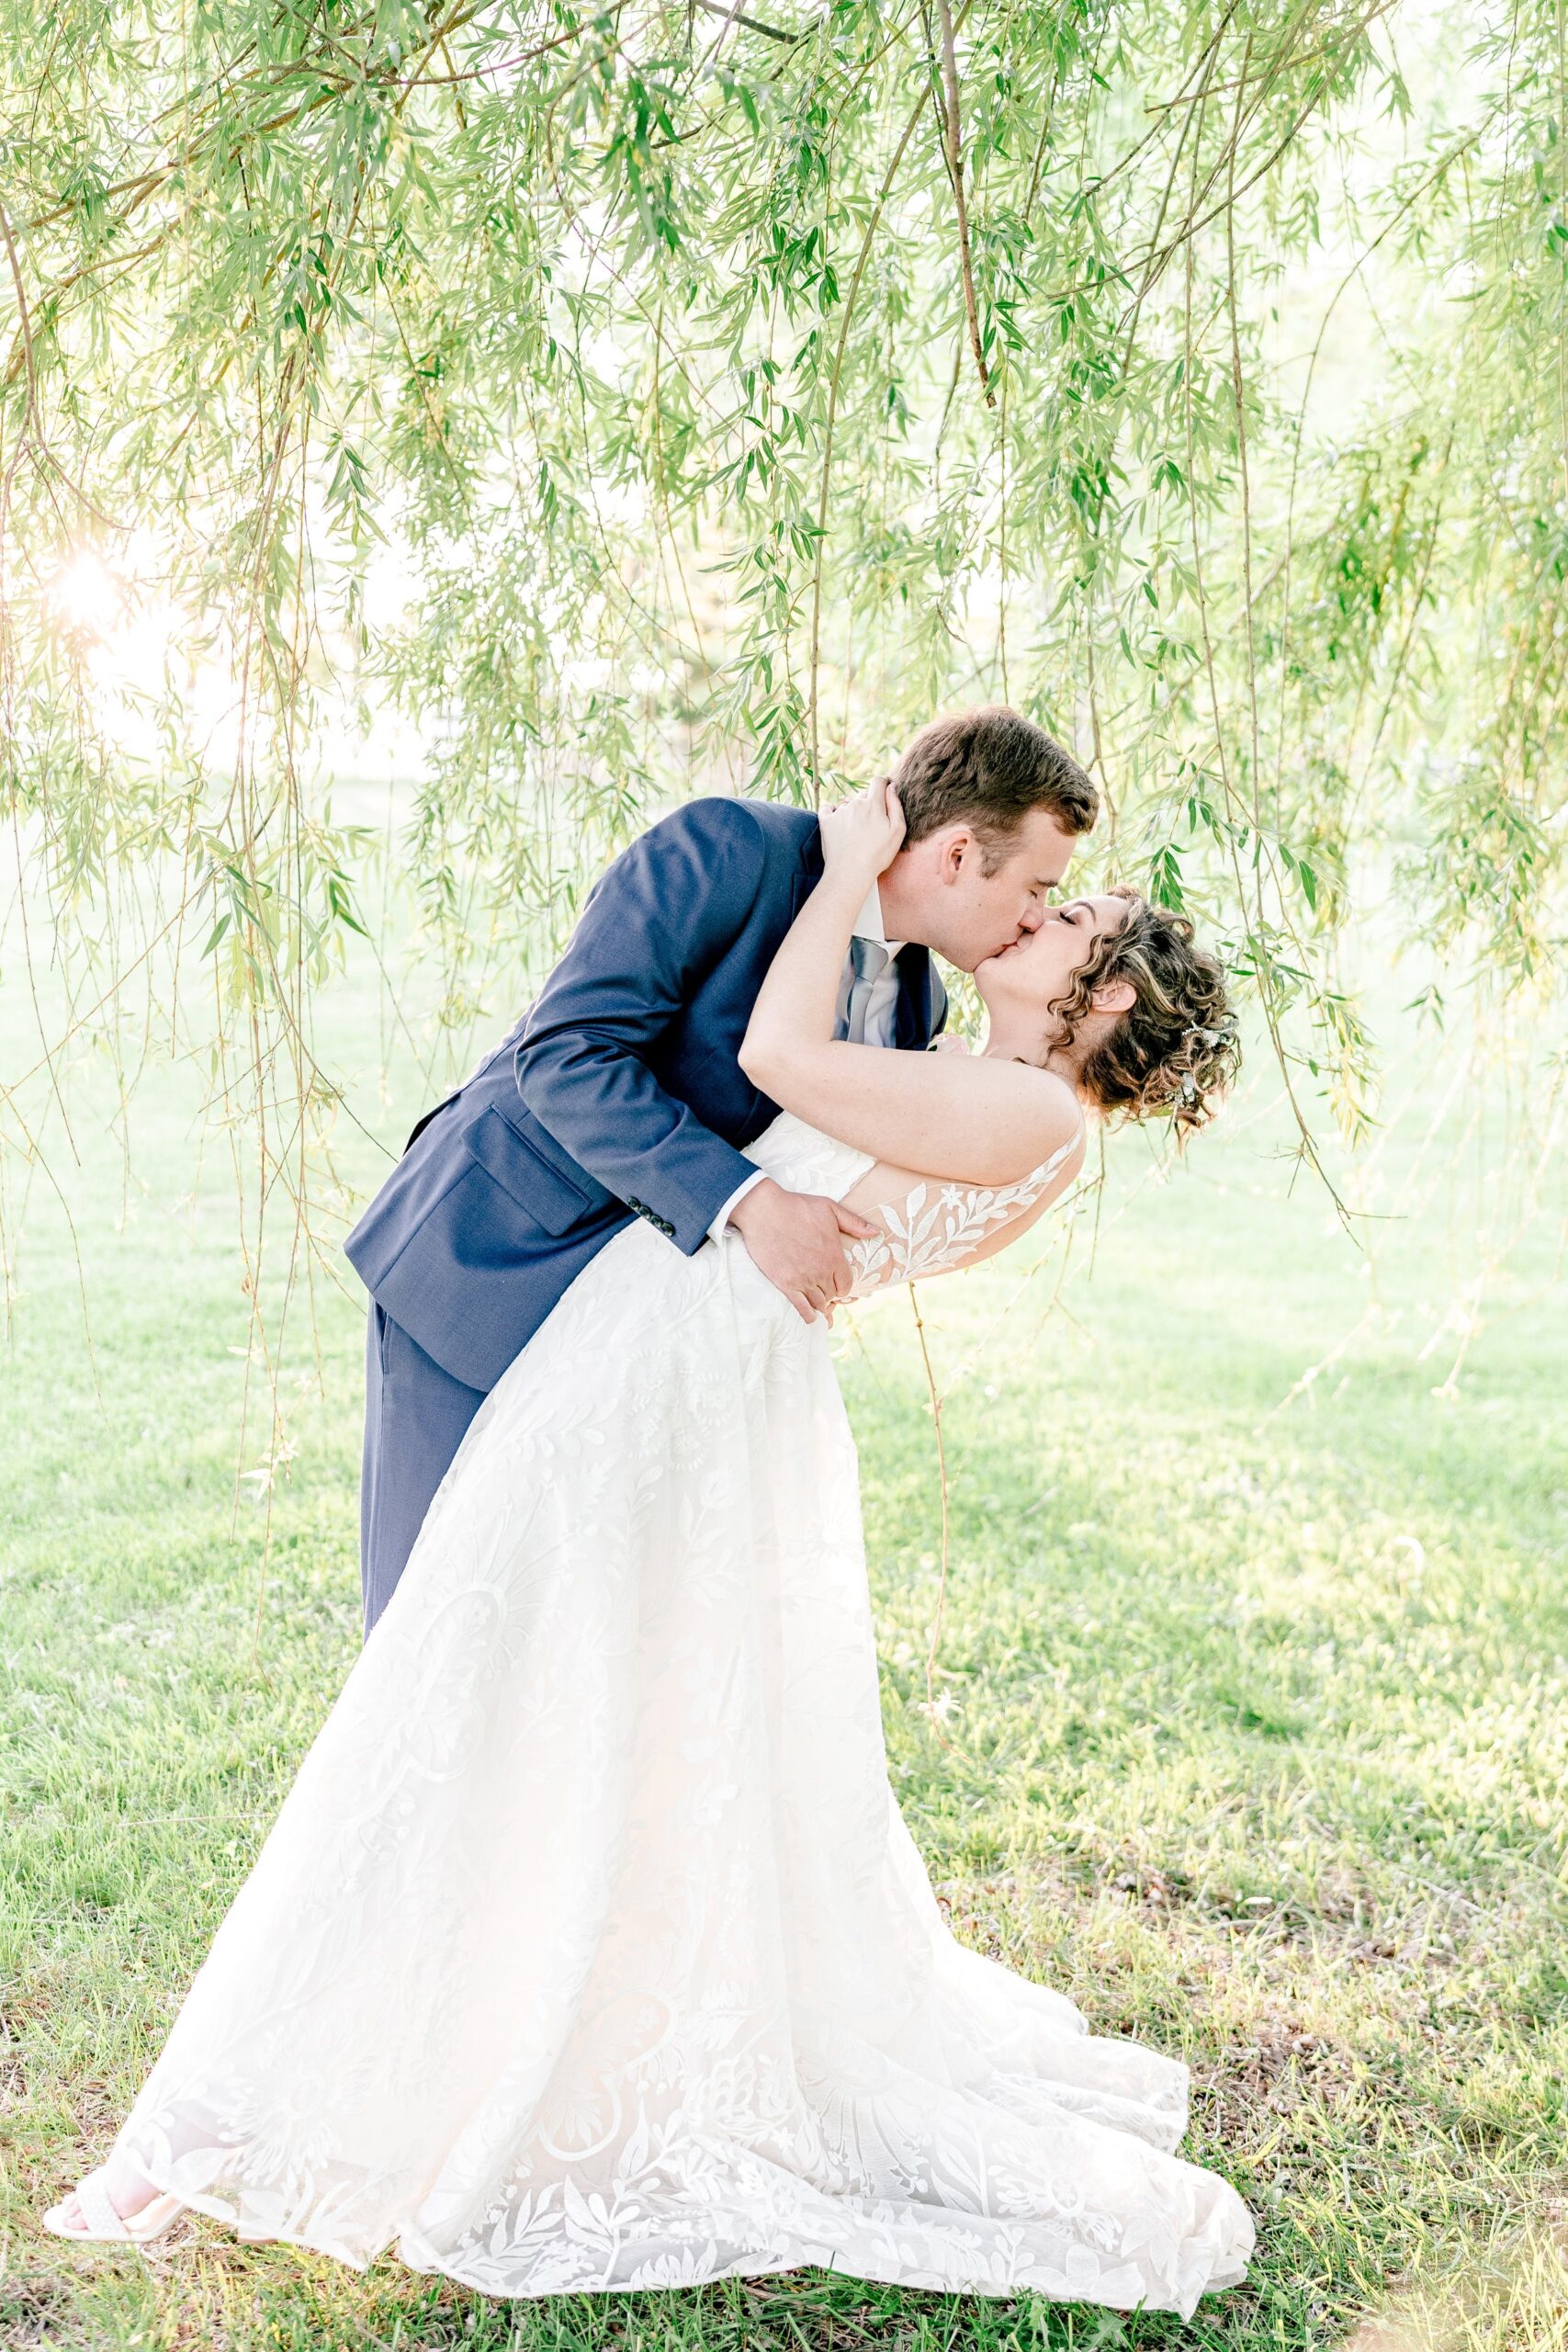 A bride and groom share a kiss under a tree during their wedding at Blue Hill Farm in Round Hill, Virginia